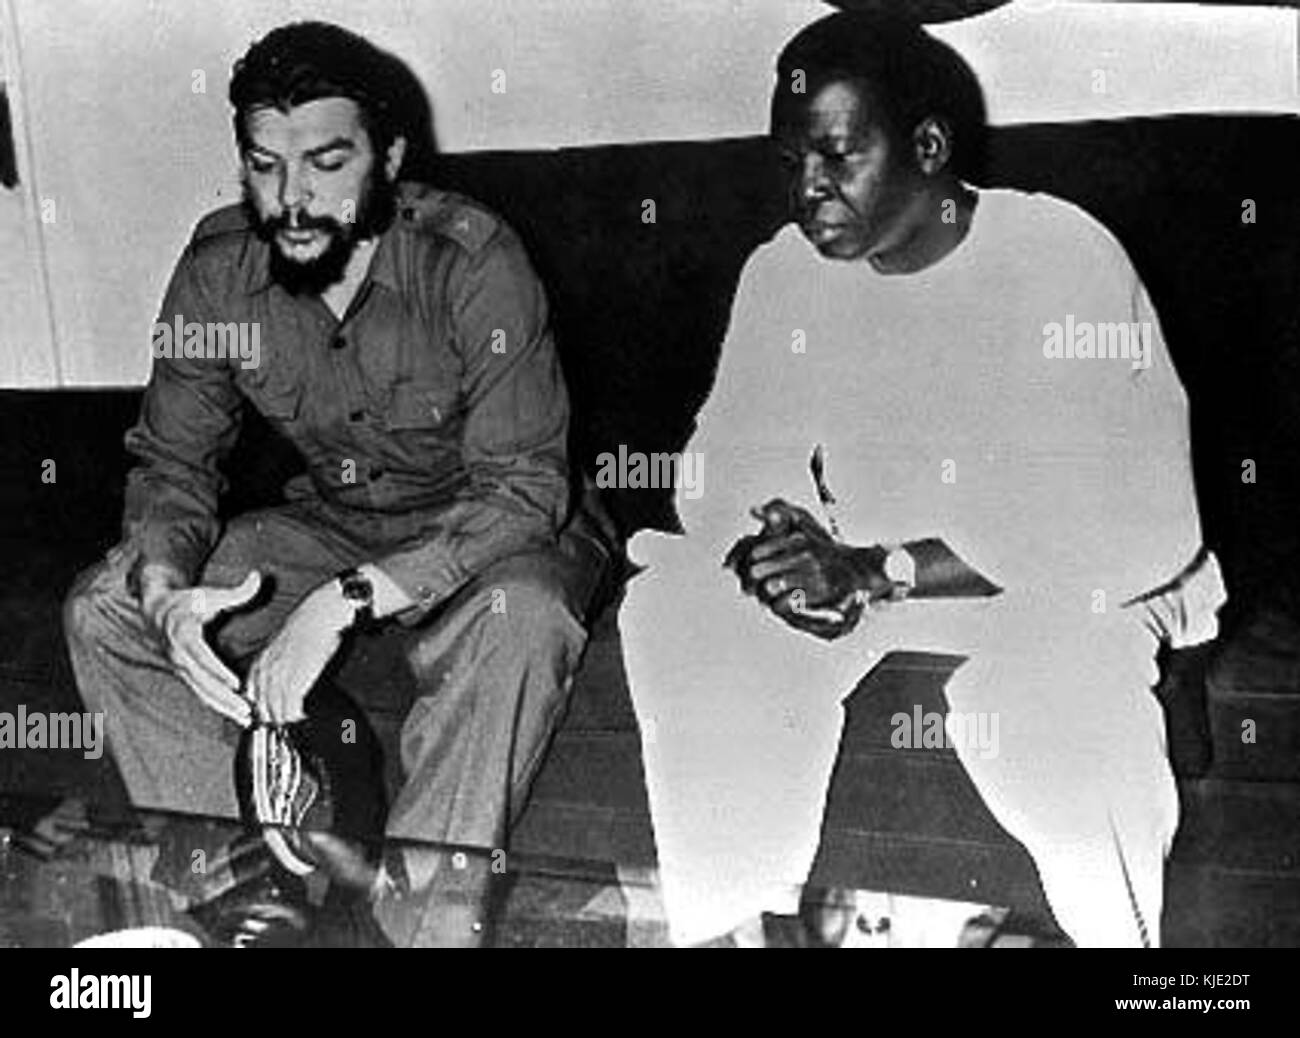 Che guevara Black and White Stock Photos & Images - Alamy